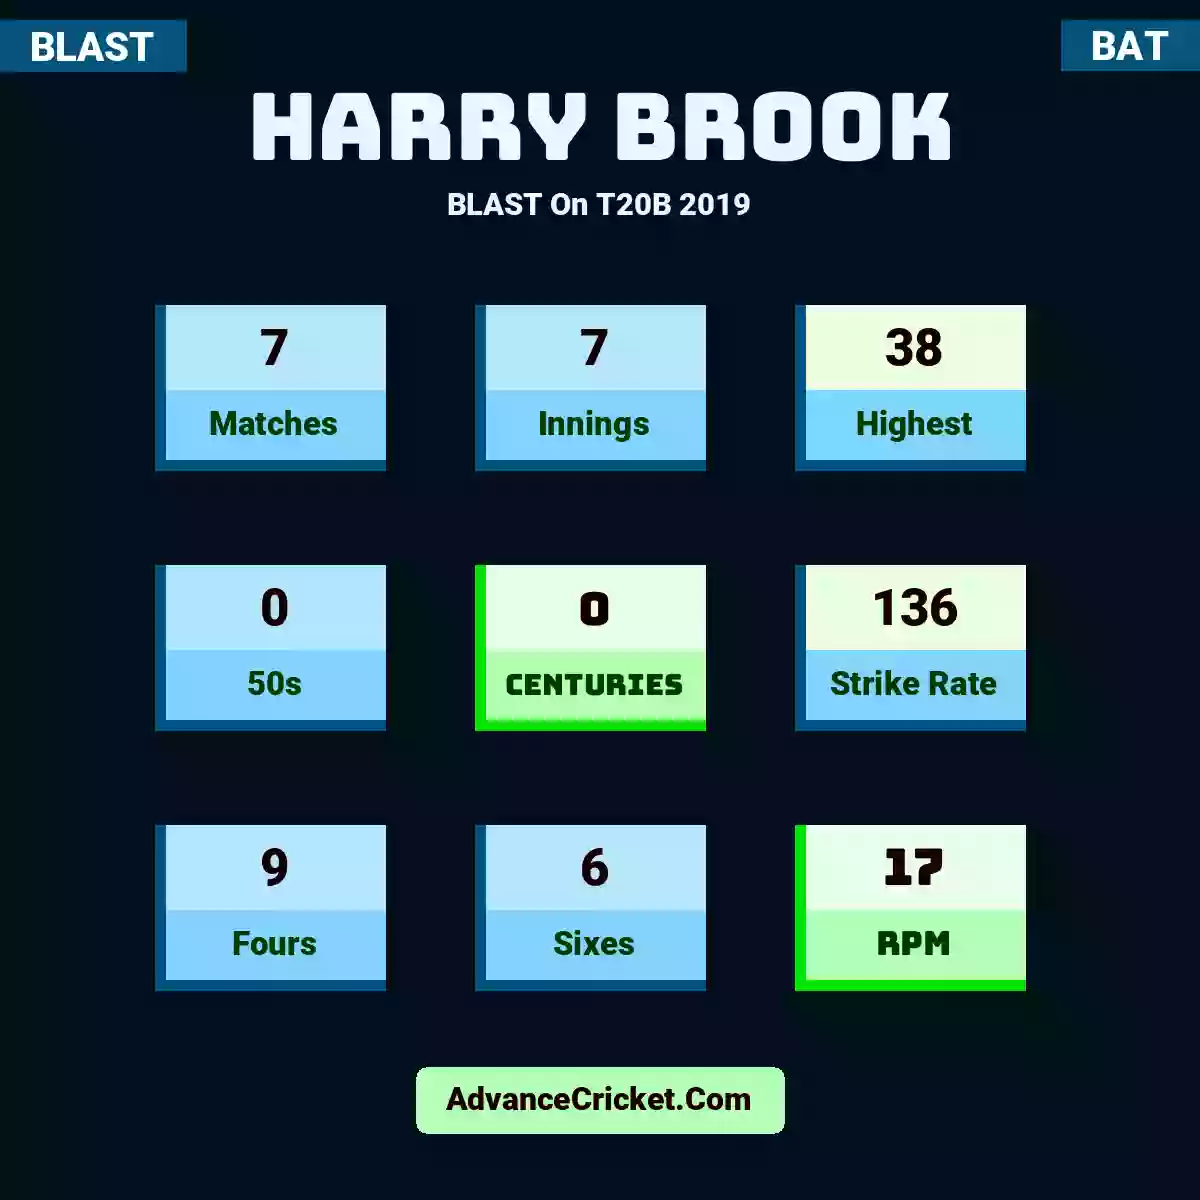 Harry Brook BLAST  On T20B 2019, Harry Brook played 7 matches, scored 38 runs as highest, 0 half-centuries, and 0 centuries, with a strike rate of 136. H.Brook hit 9 fours and 6 sixes, with an RPM of 17.